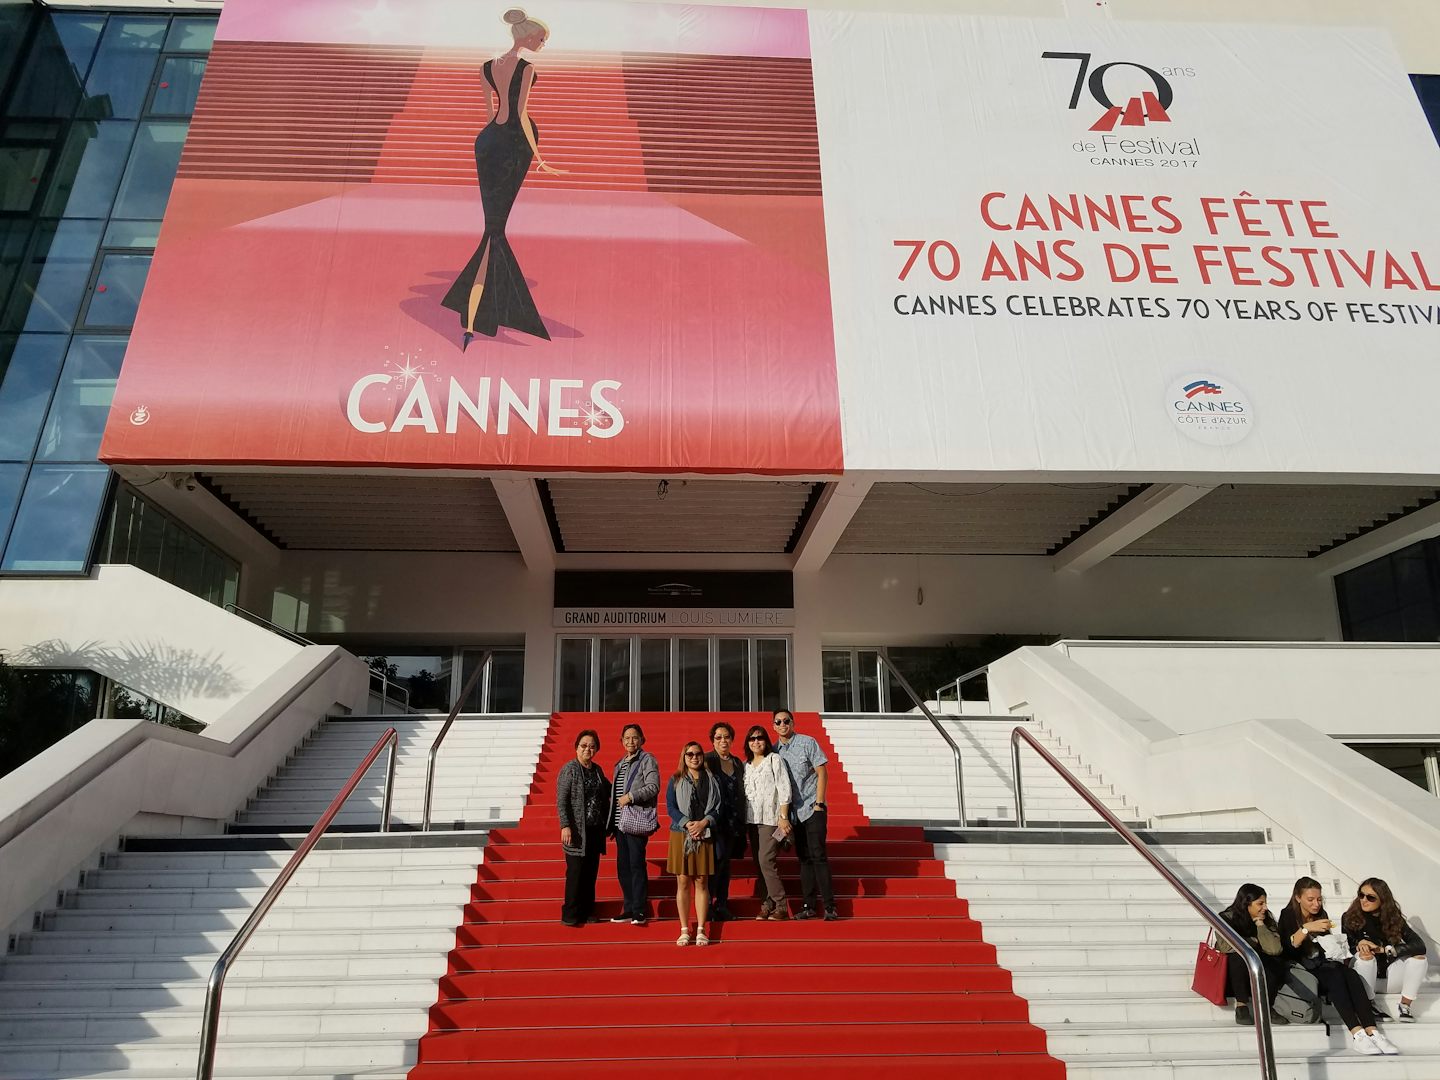 The red carpet used during Cannes film festival.